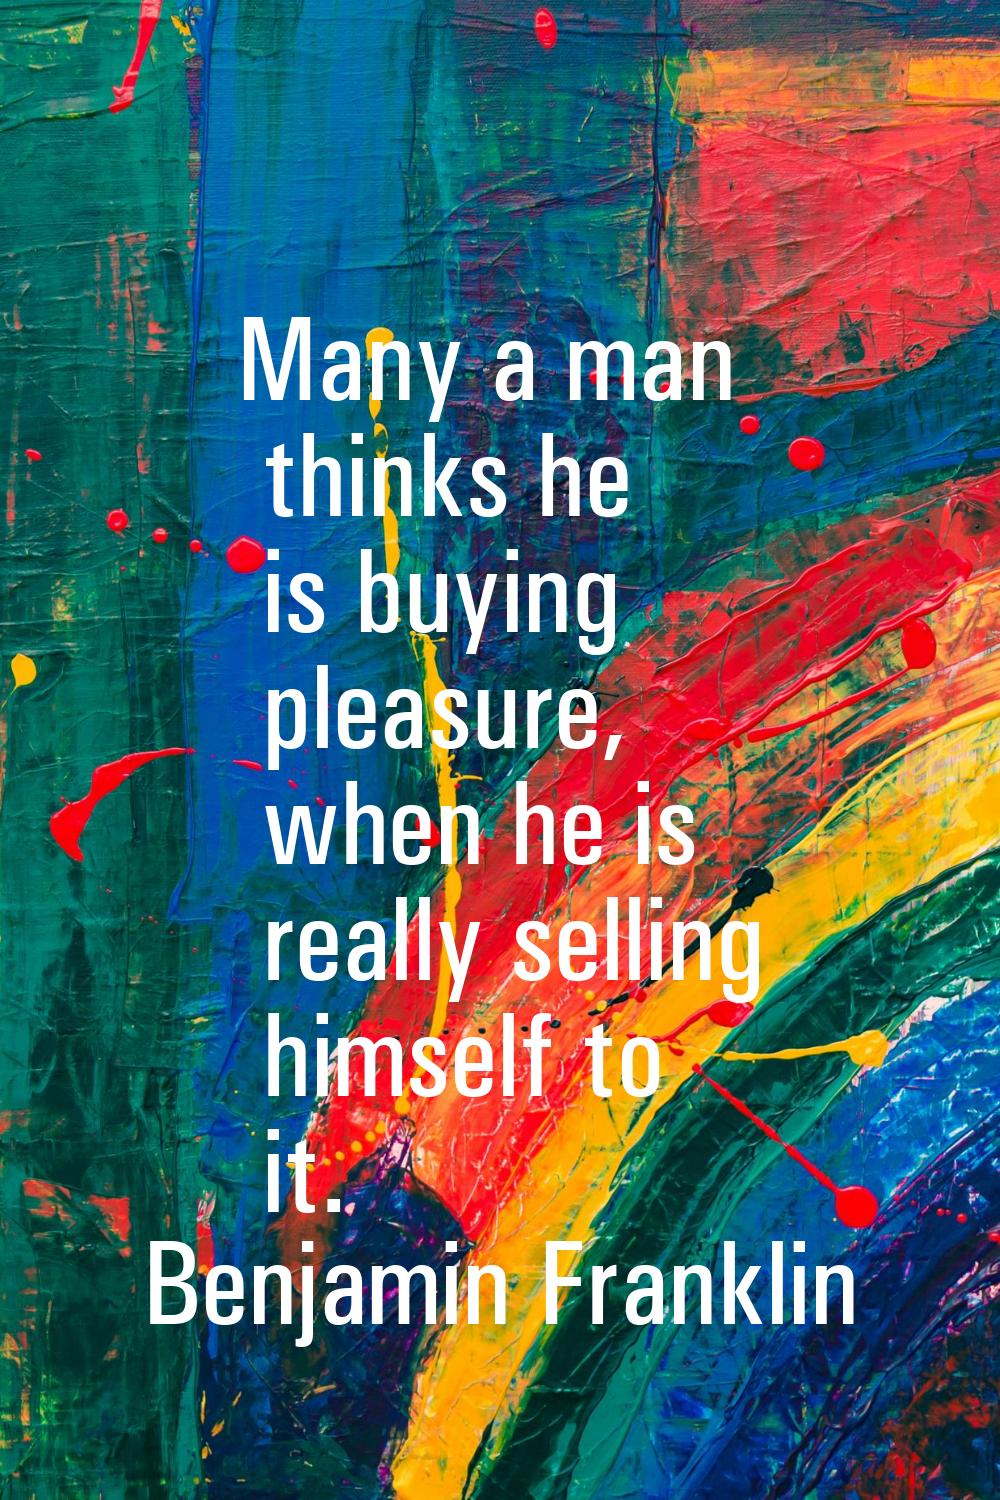 Many a man thinks he is buying pleasure, when he is really selling himself to it.